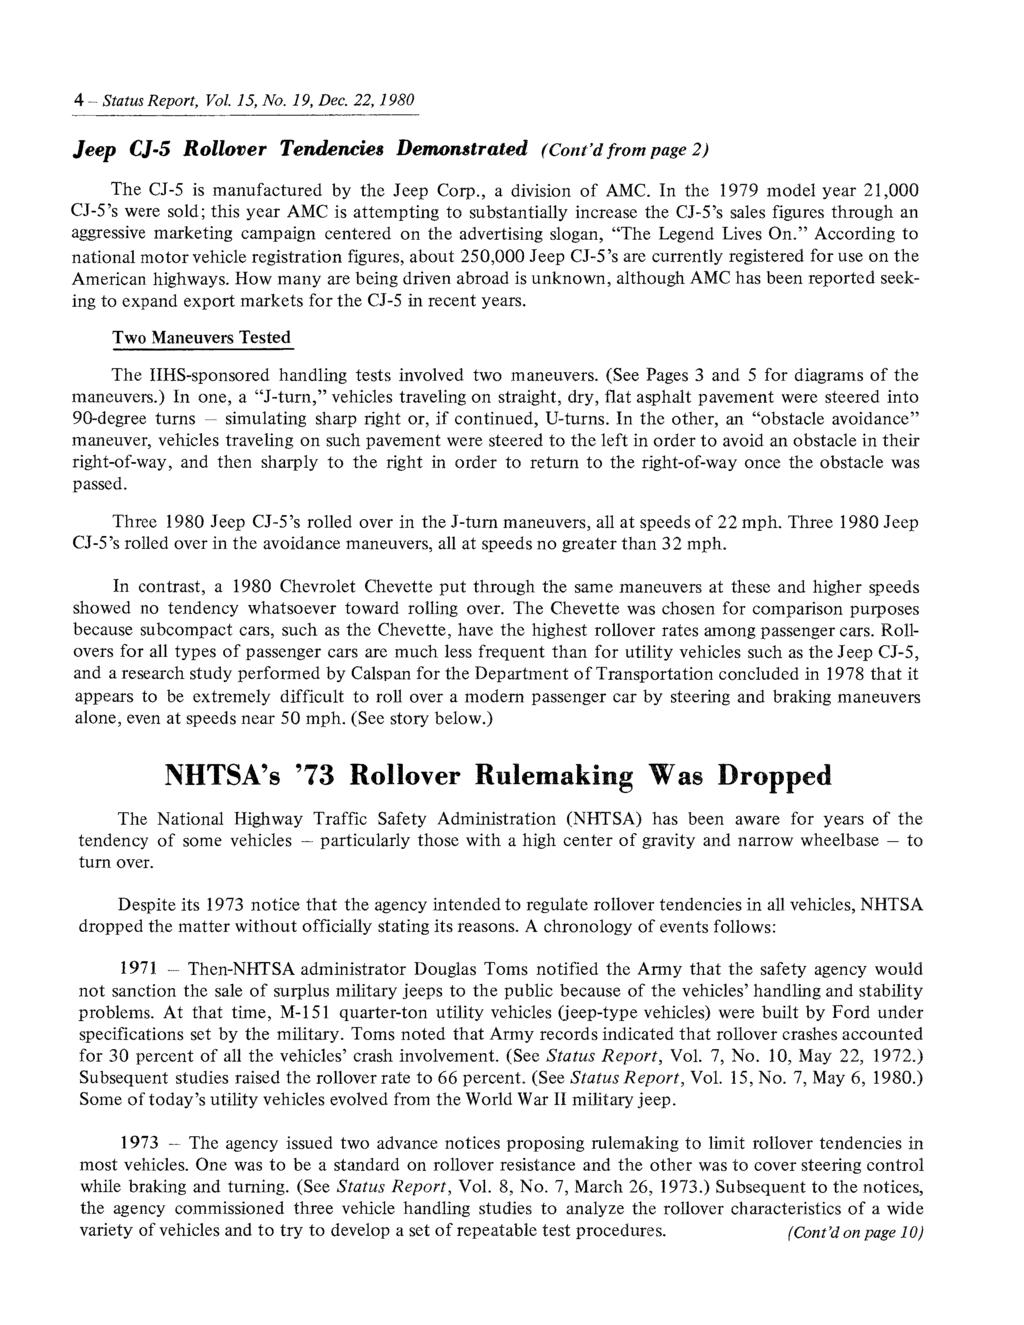 4 - Status Report, Vol. 15, No. 19, Dec. 22, 1980 Jeep CJ 5 Rollover Tendencies page The CJ-5 is mallufactured by the Jeep Corp., a division of AMC.